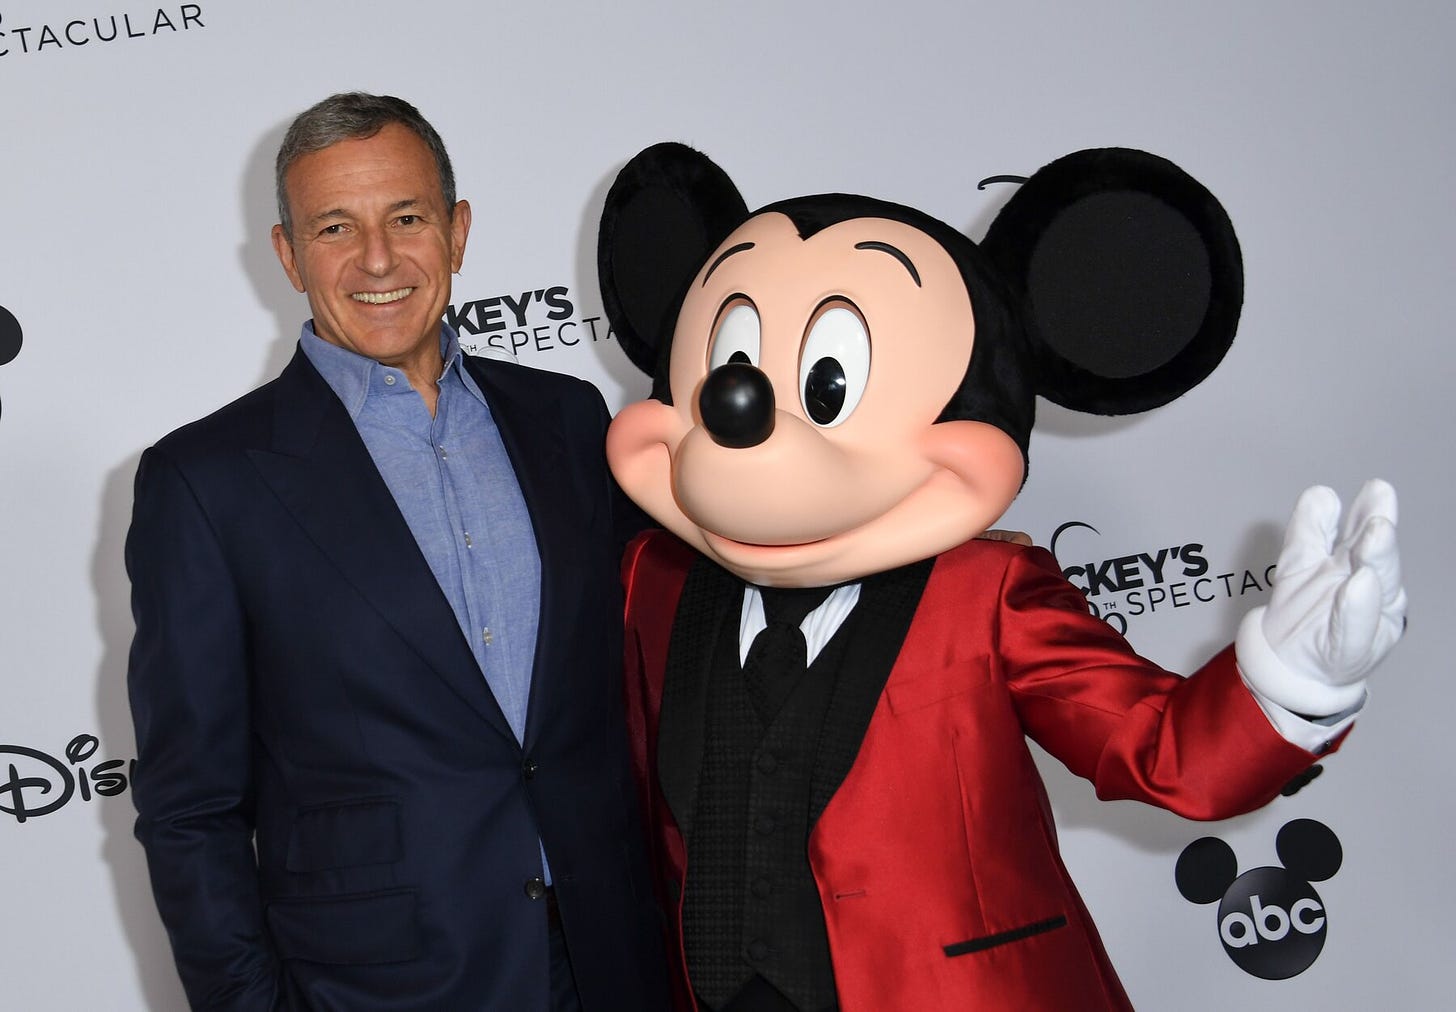 Bob Iger Returns as Disney CEO After Chapek Is Fired - The New York Times